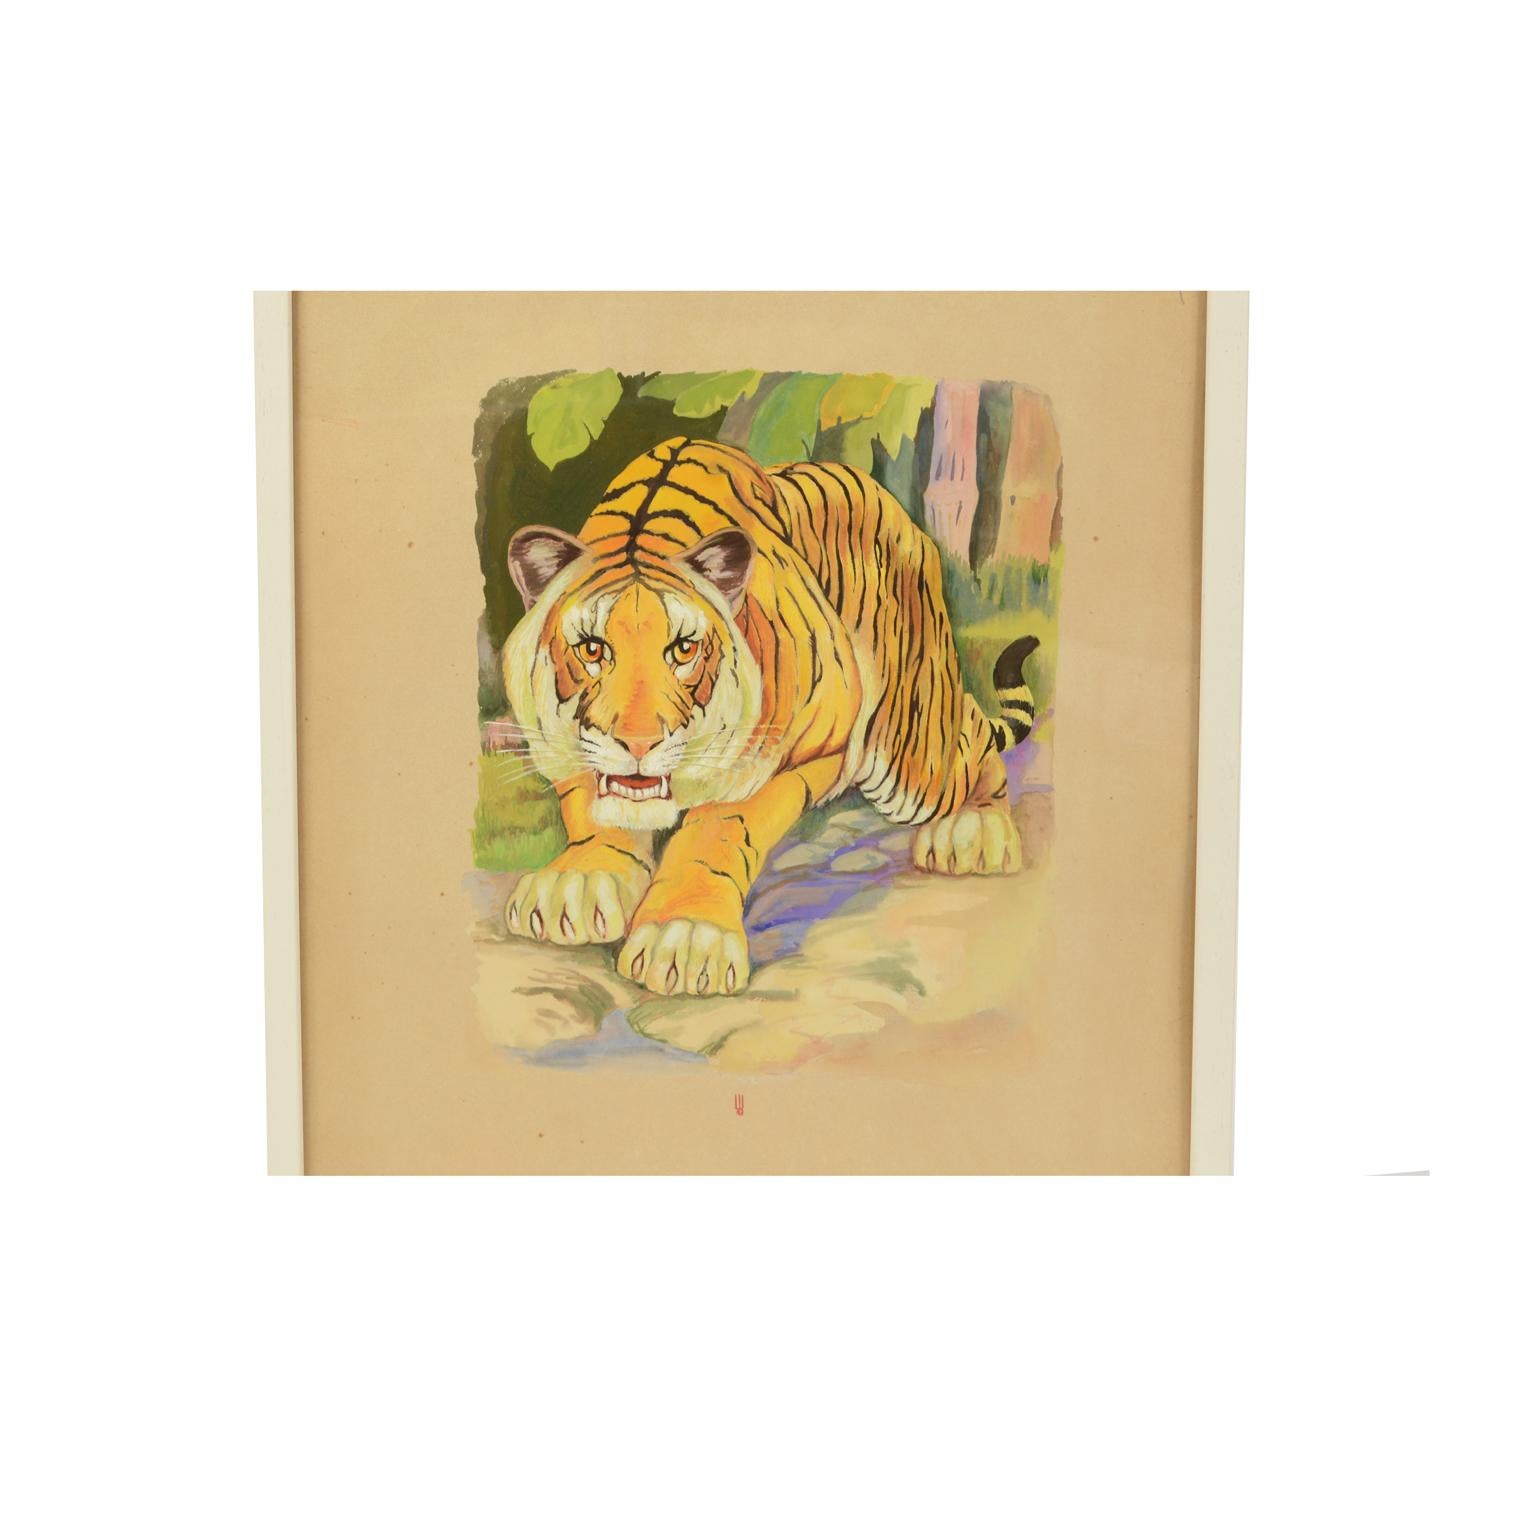 Acrylic colors on paper depicting a tiger; it is a preparatory sketch commissioned for an animals encyclopedia for children, created and signed by a Korean artist in the 1970s. Very good condition. With frame 49.5 x 67 cm.
Shipping is insured by